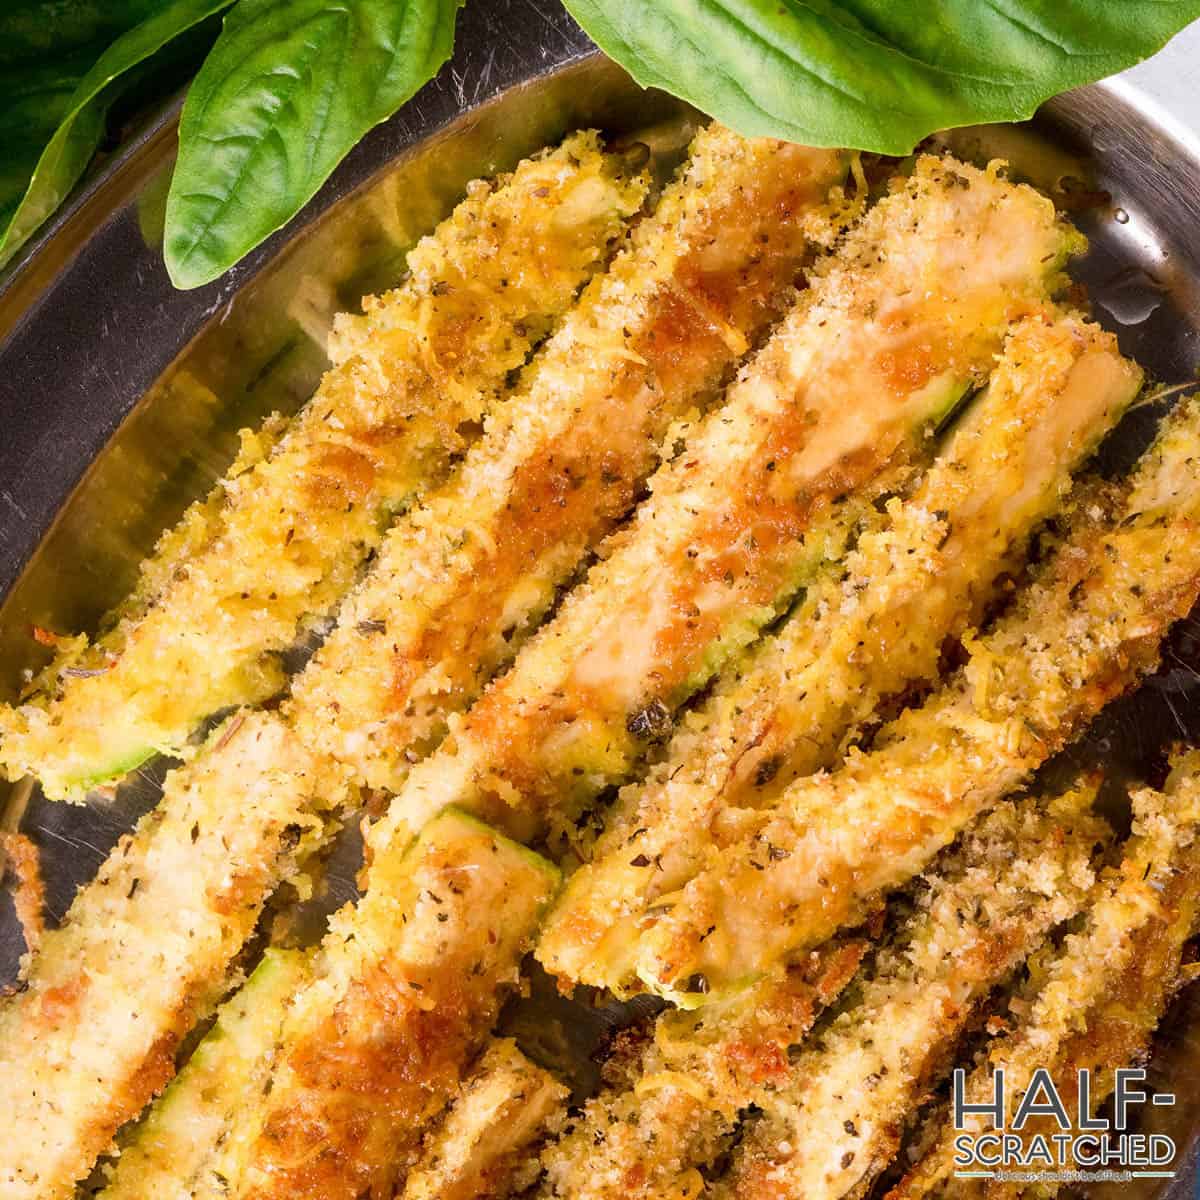 Baked breaded zucchinis